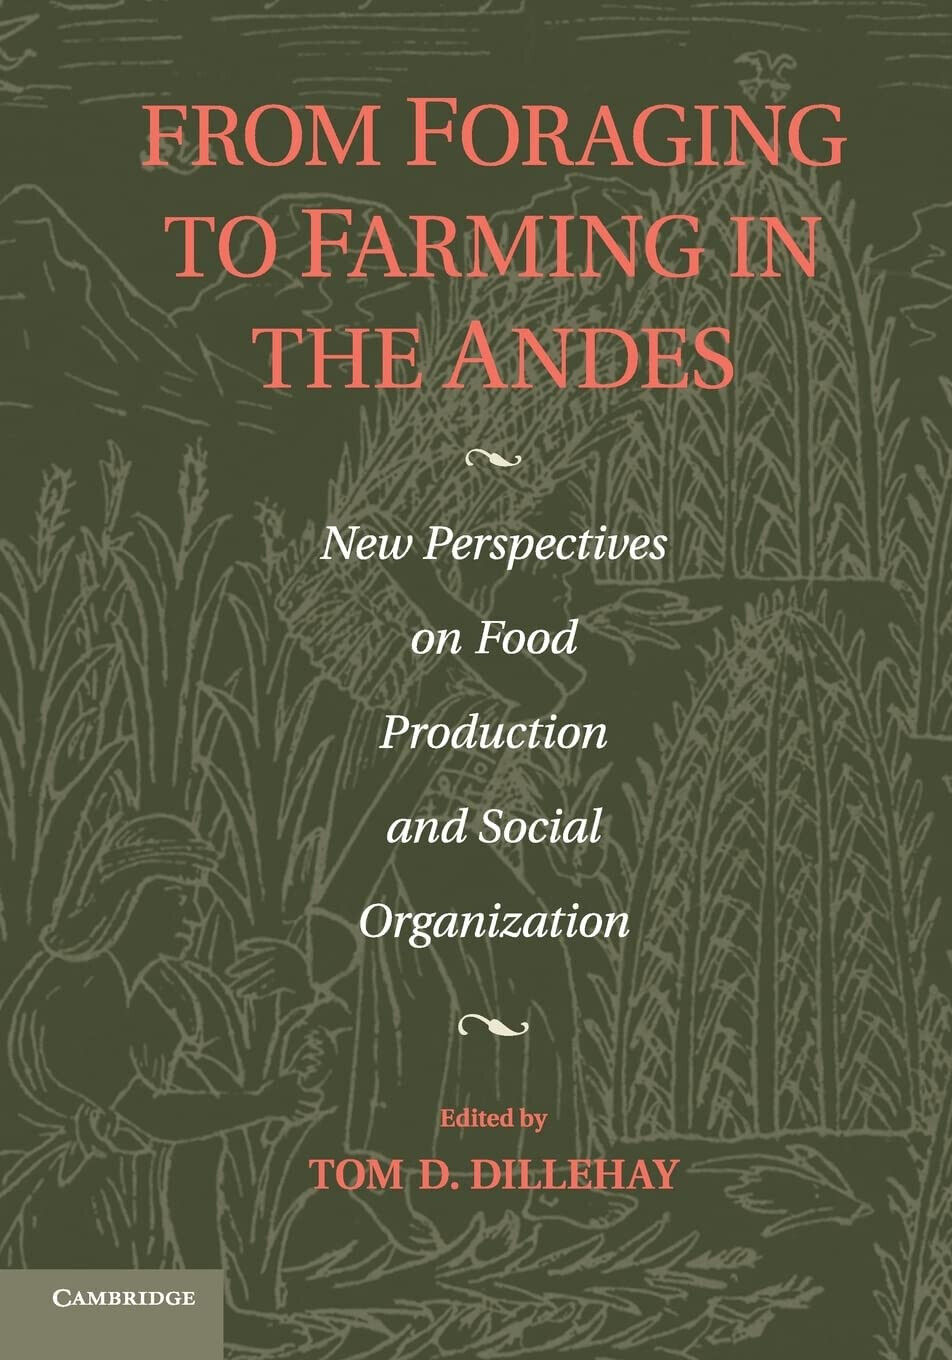 From Foraging to Farming in the Andes - Tom D. Dillehay - Cambridge, 2014